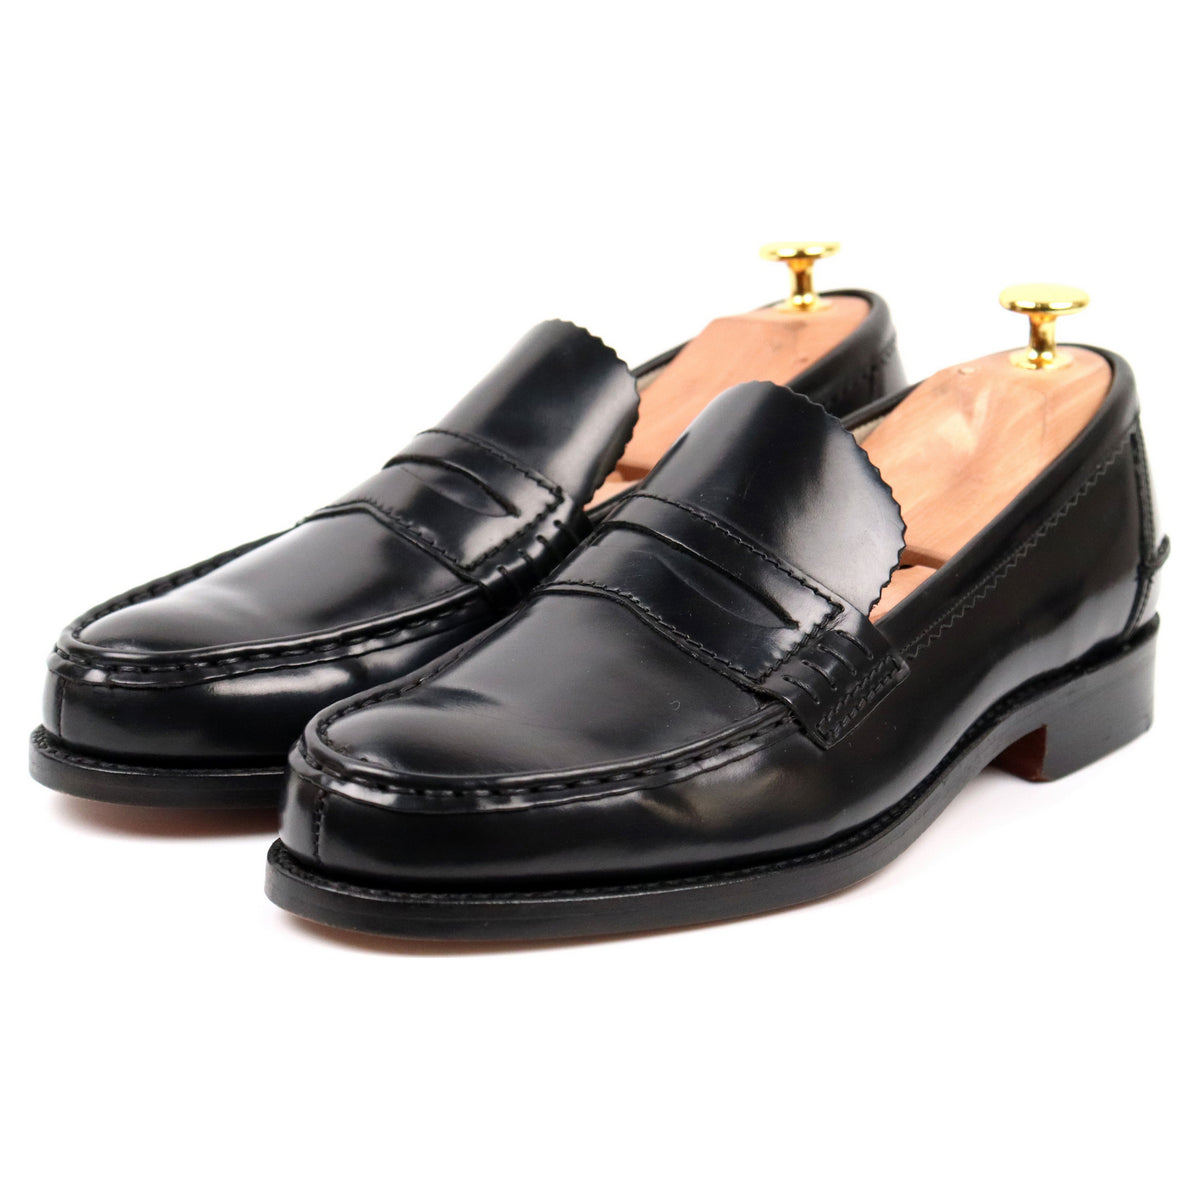 Black Leather Loafers UK 5.5 G